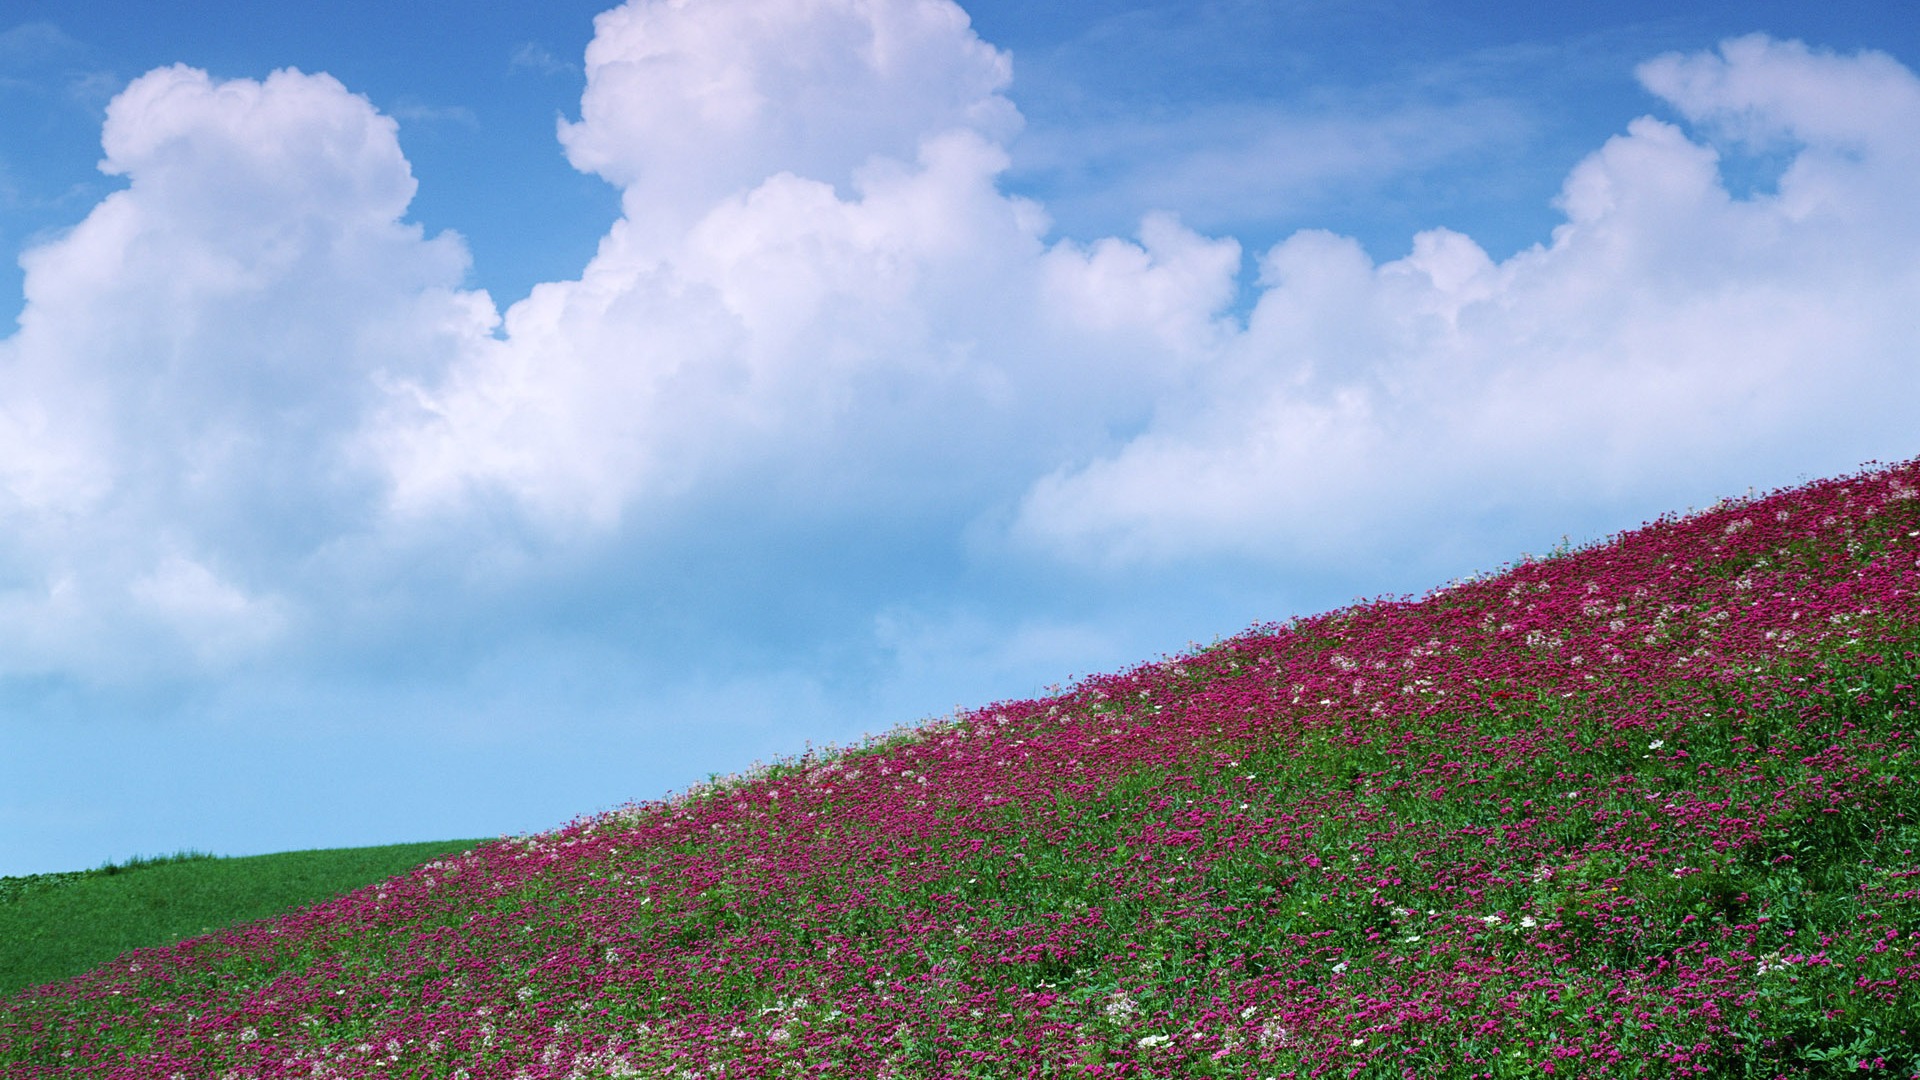 Blue sky white clouds and flowers wallpaper #13 - 1920x1080